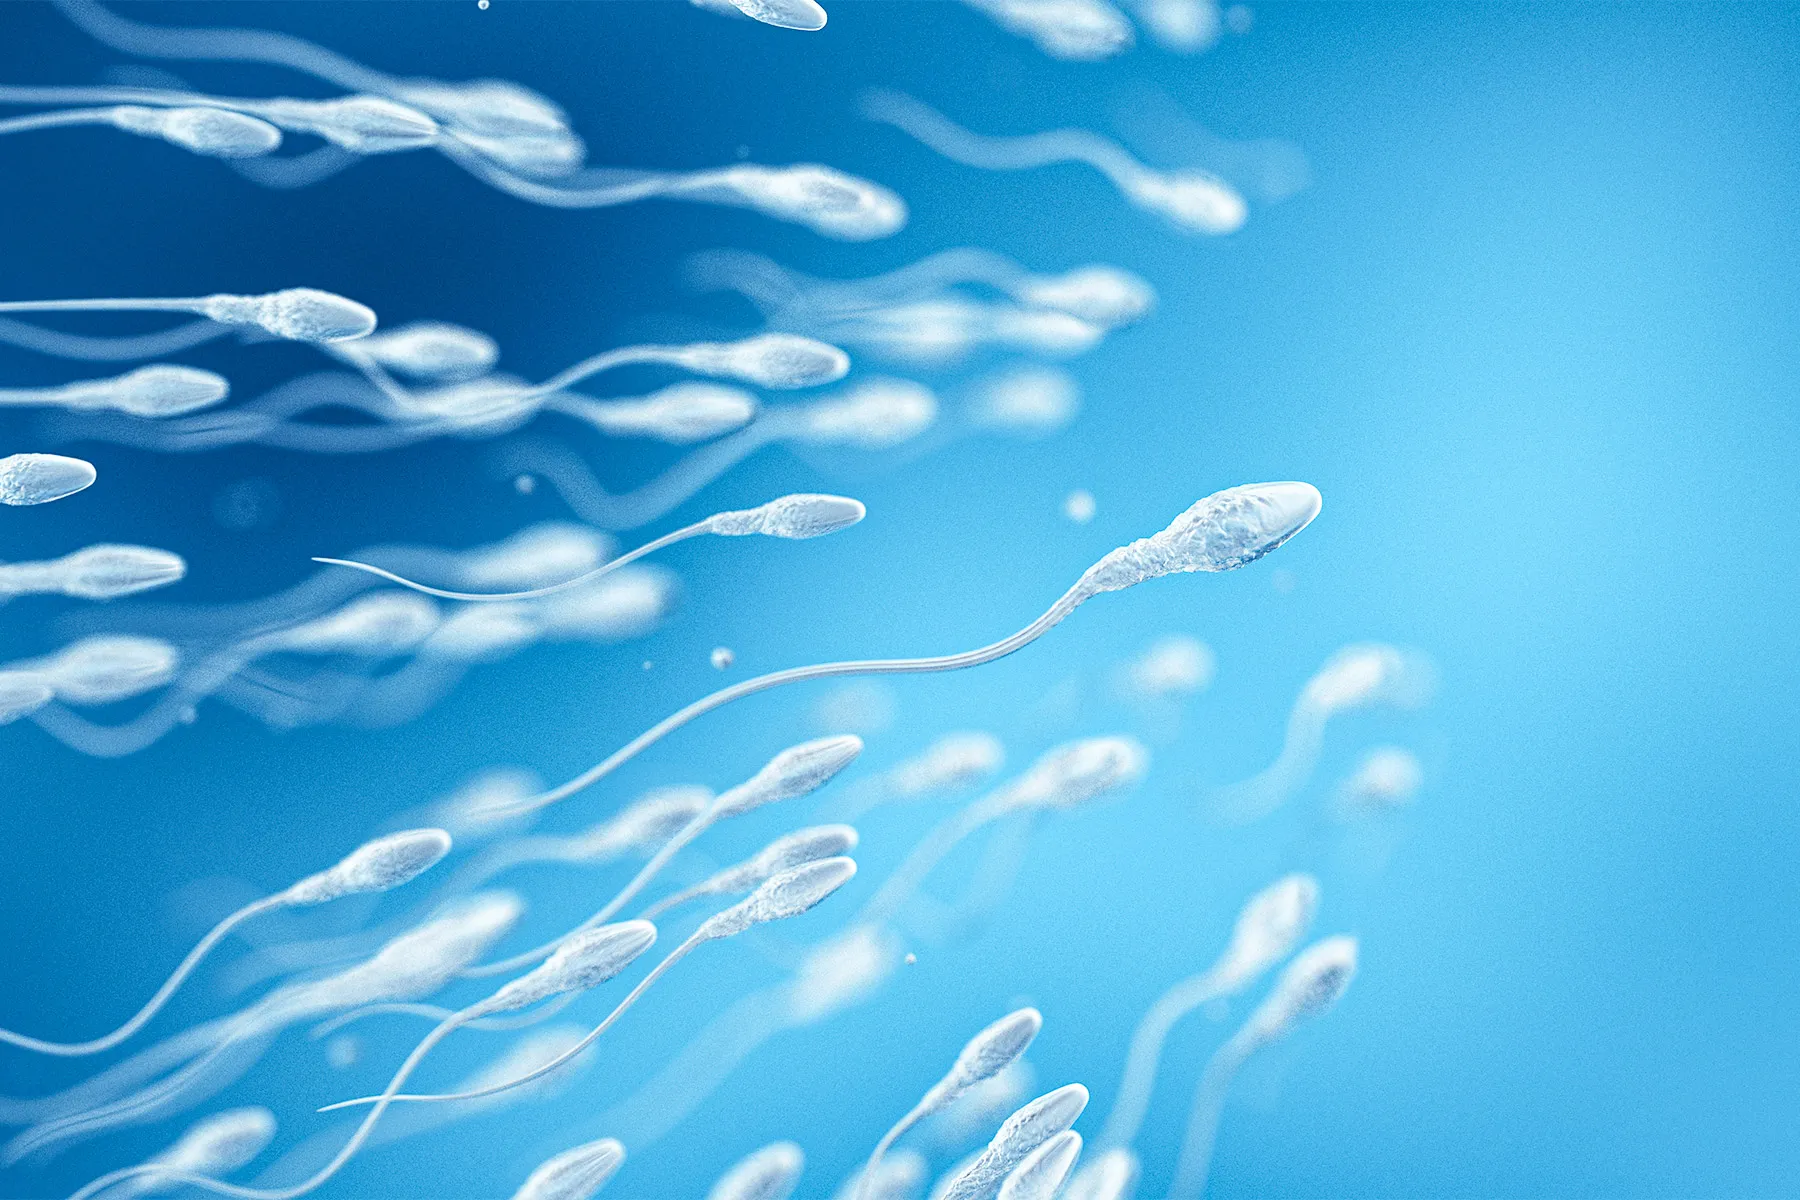 Sperm Donors May Not Be as Anonymous as They Think